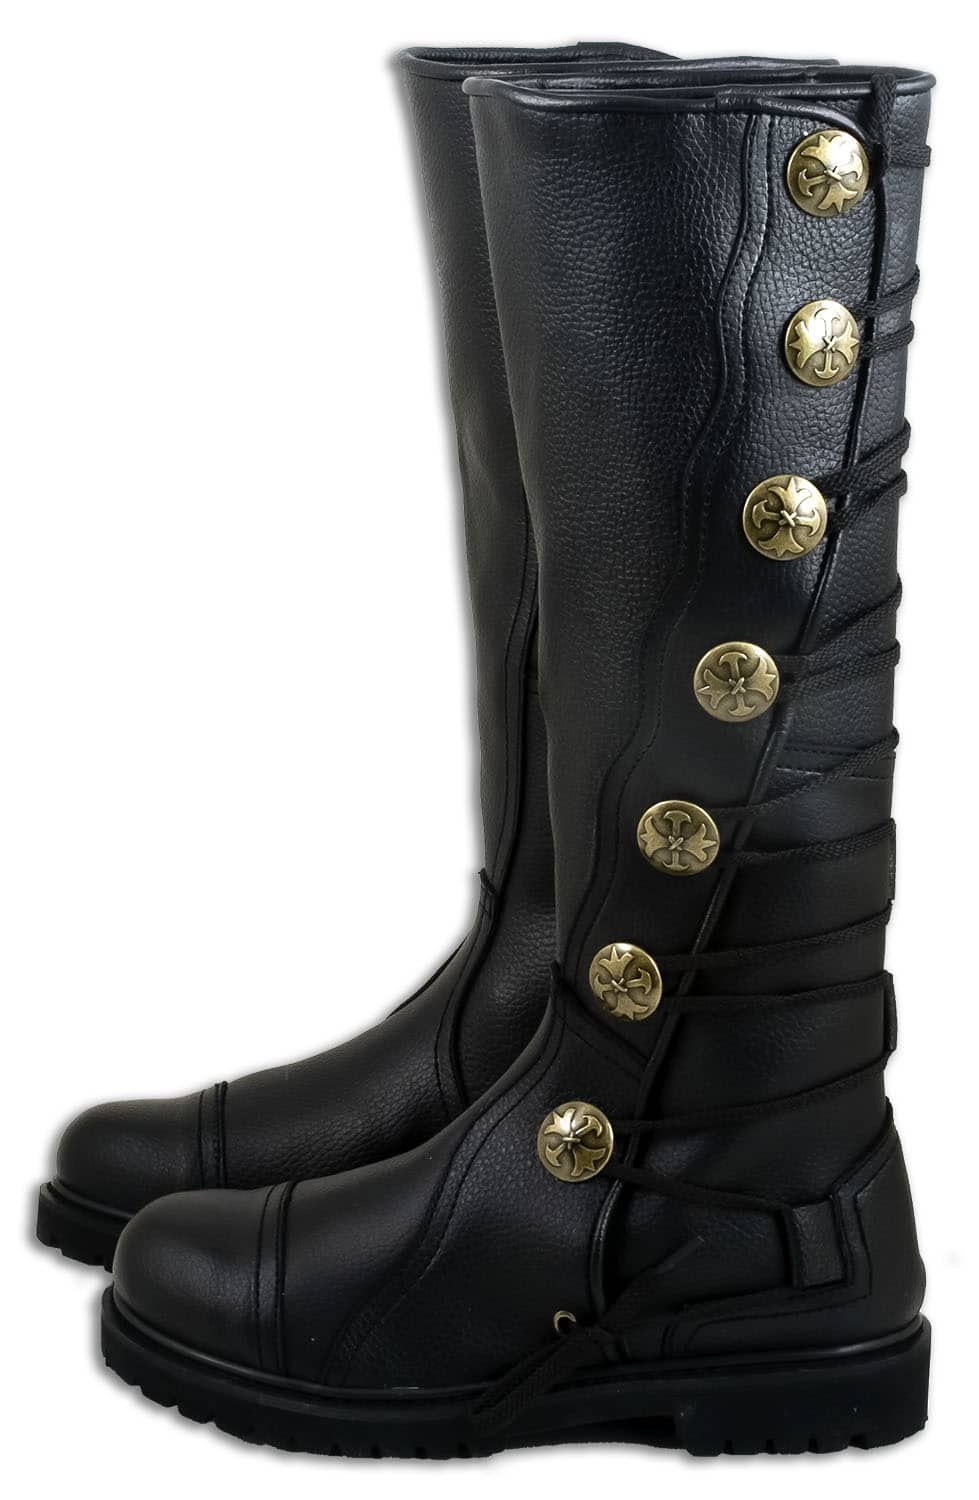 Premium Black Leather Knee-High Boots are soft and durable